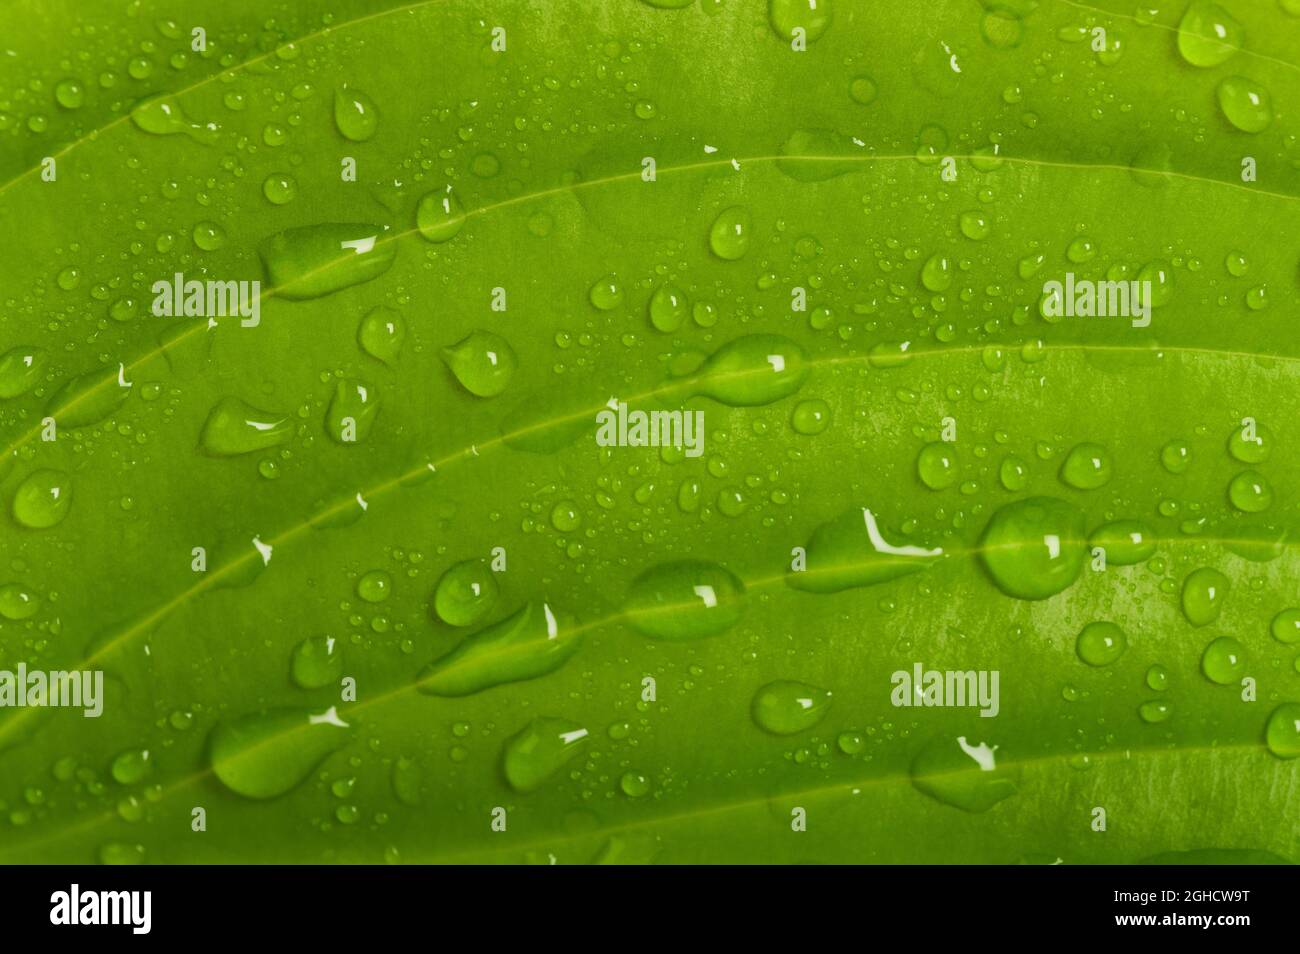 Fresh wet green leaf with drops Stock Photo